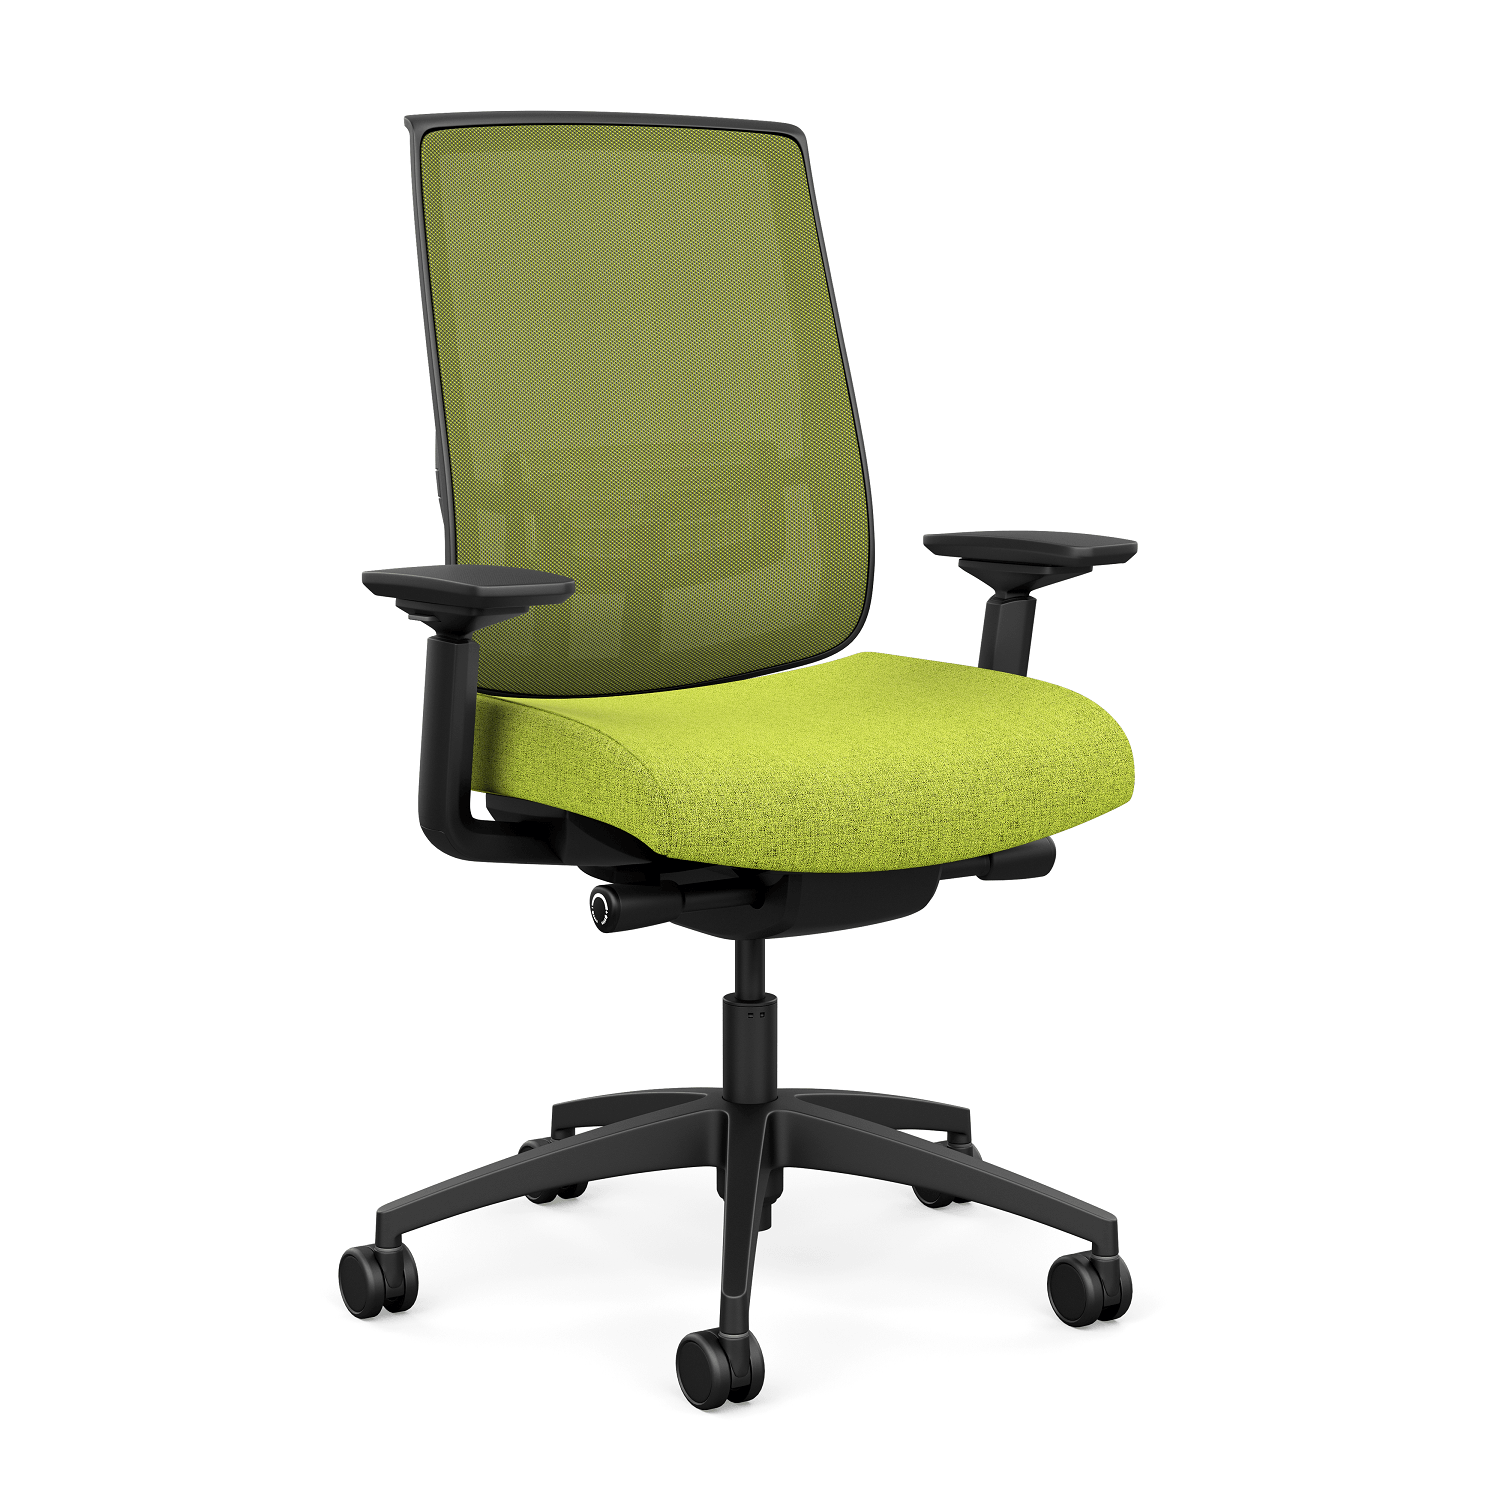 SitOnIt Focus 2.0 Task Chair